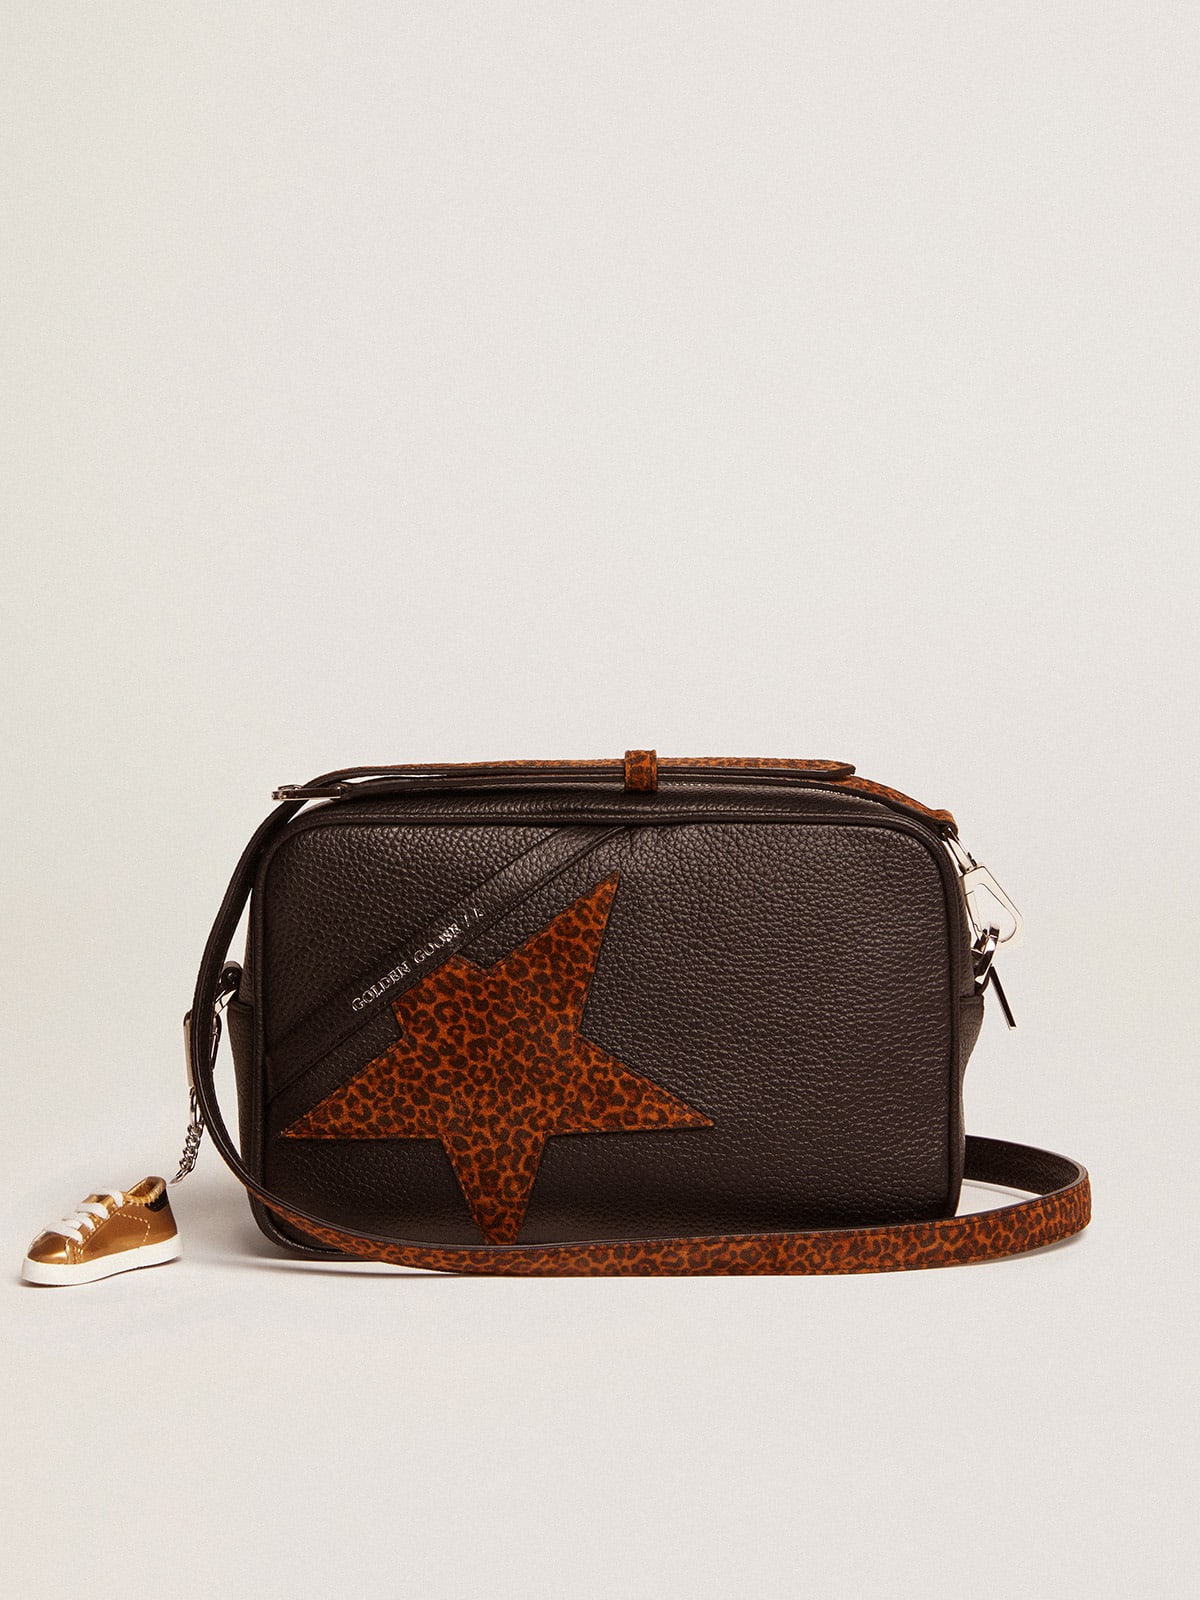 Star Bag in dark brown leather with leopard-print suede star